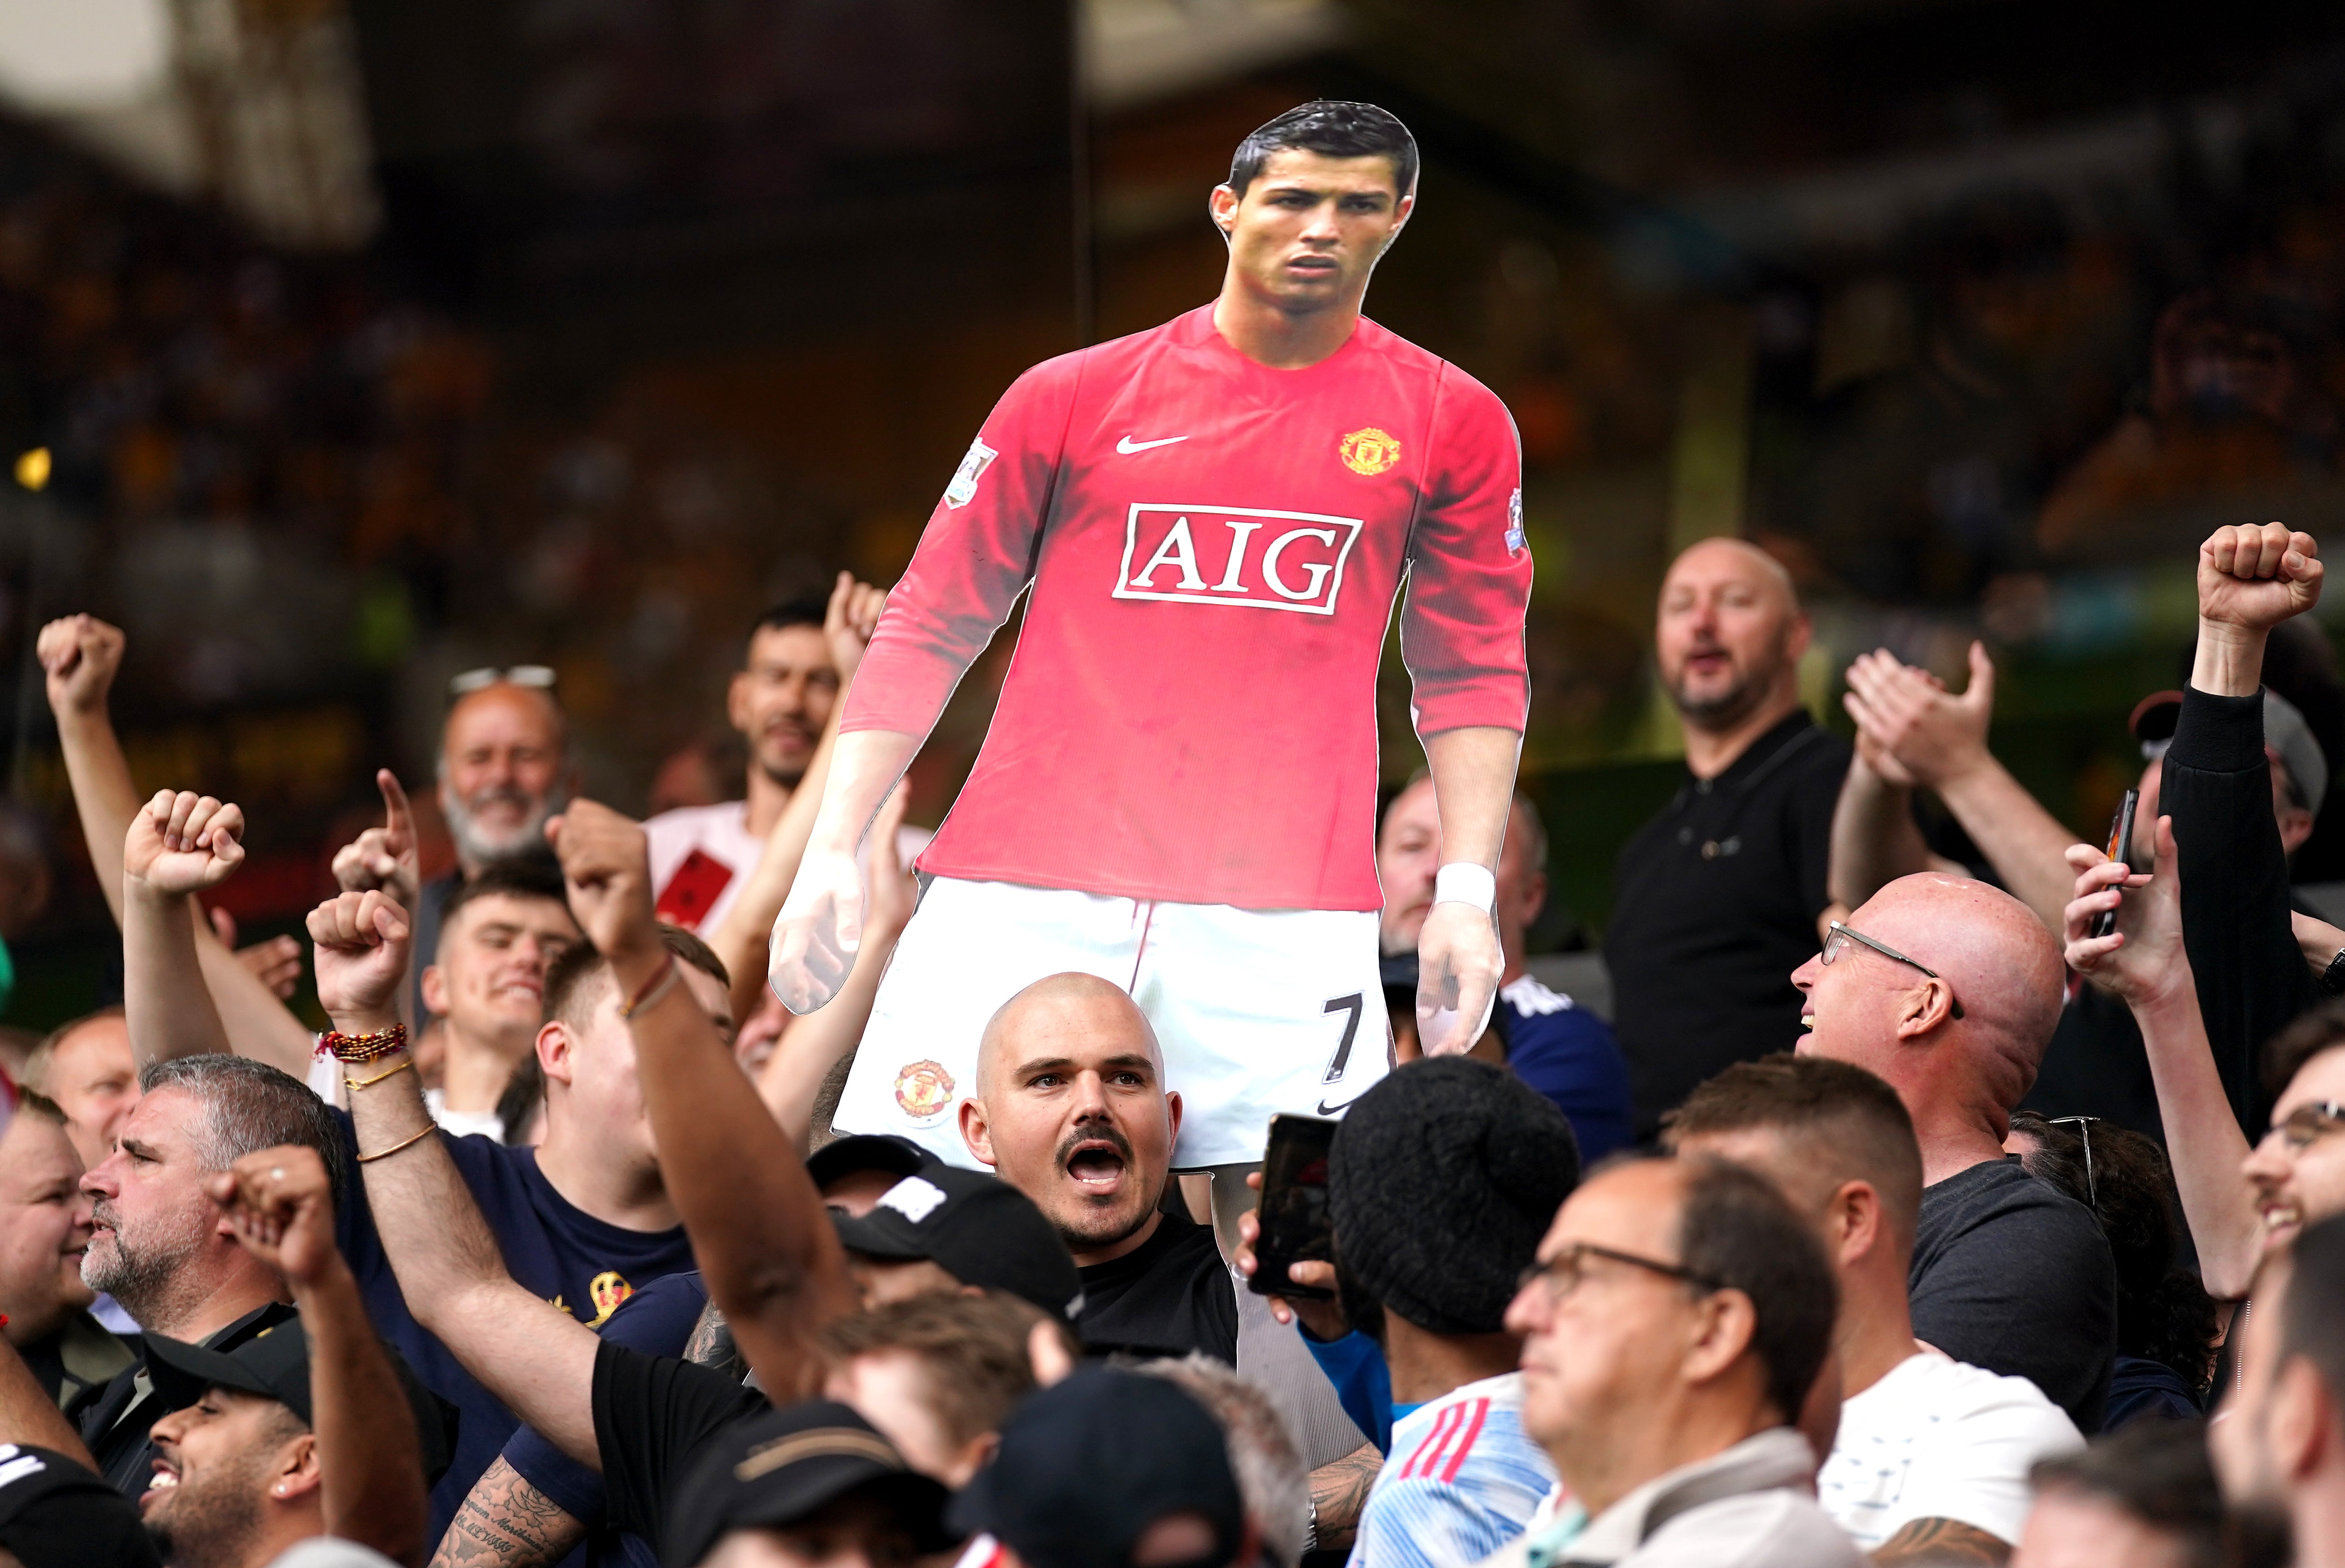 Manchester United fans celebrate Cristiano Ronaldo’s impending return to the club during Sunday’s 1-0 Premier League win at Wolves